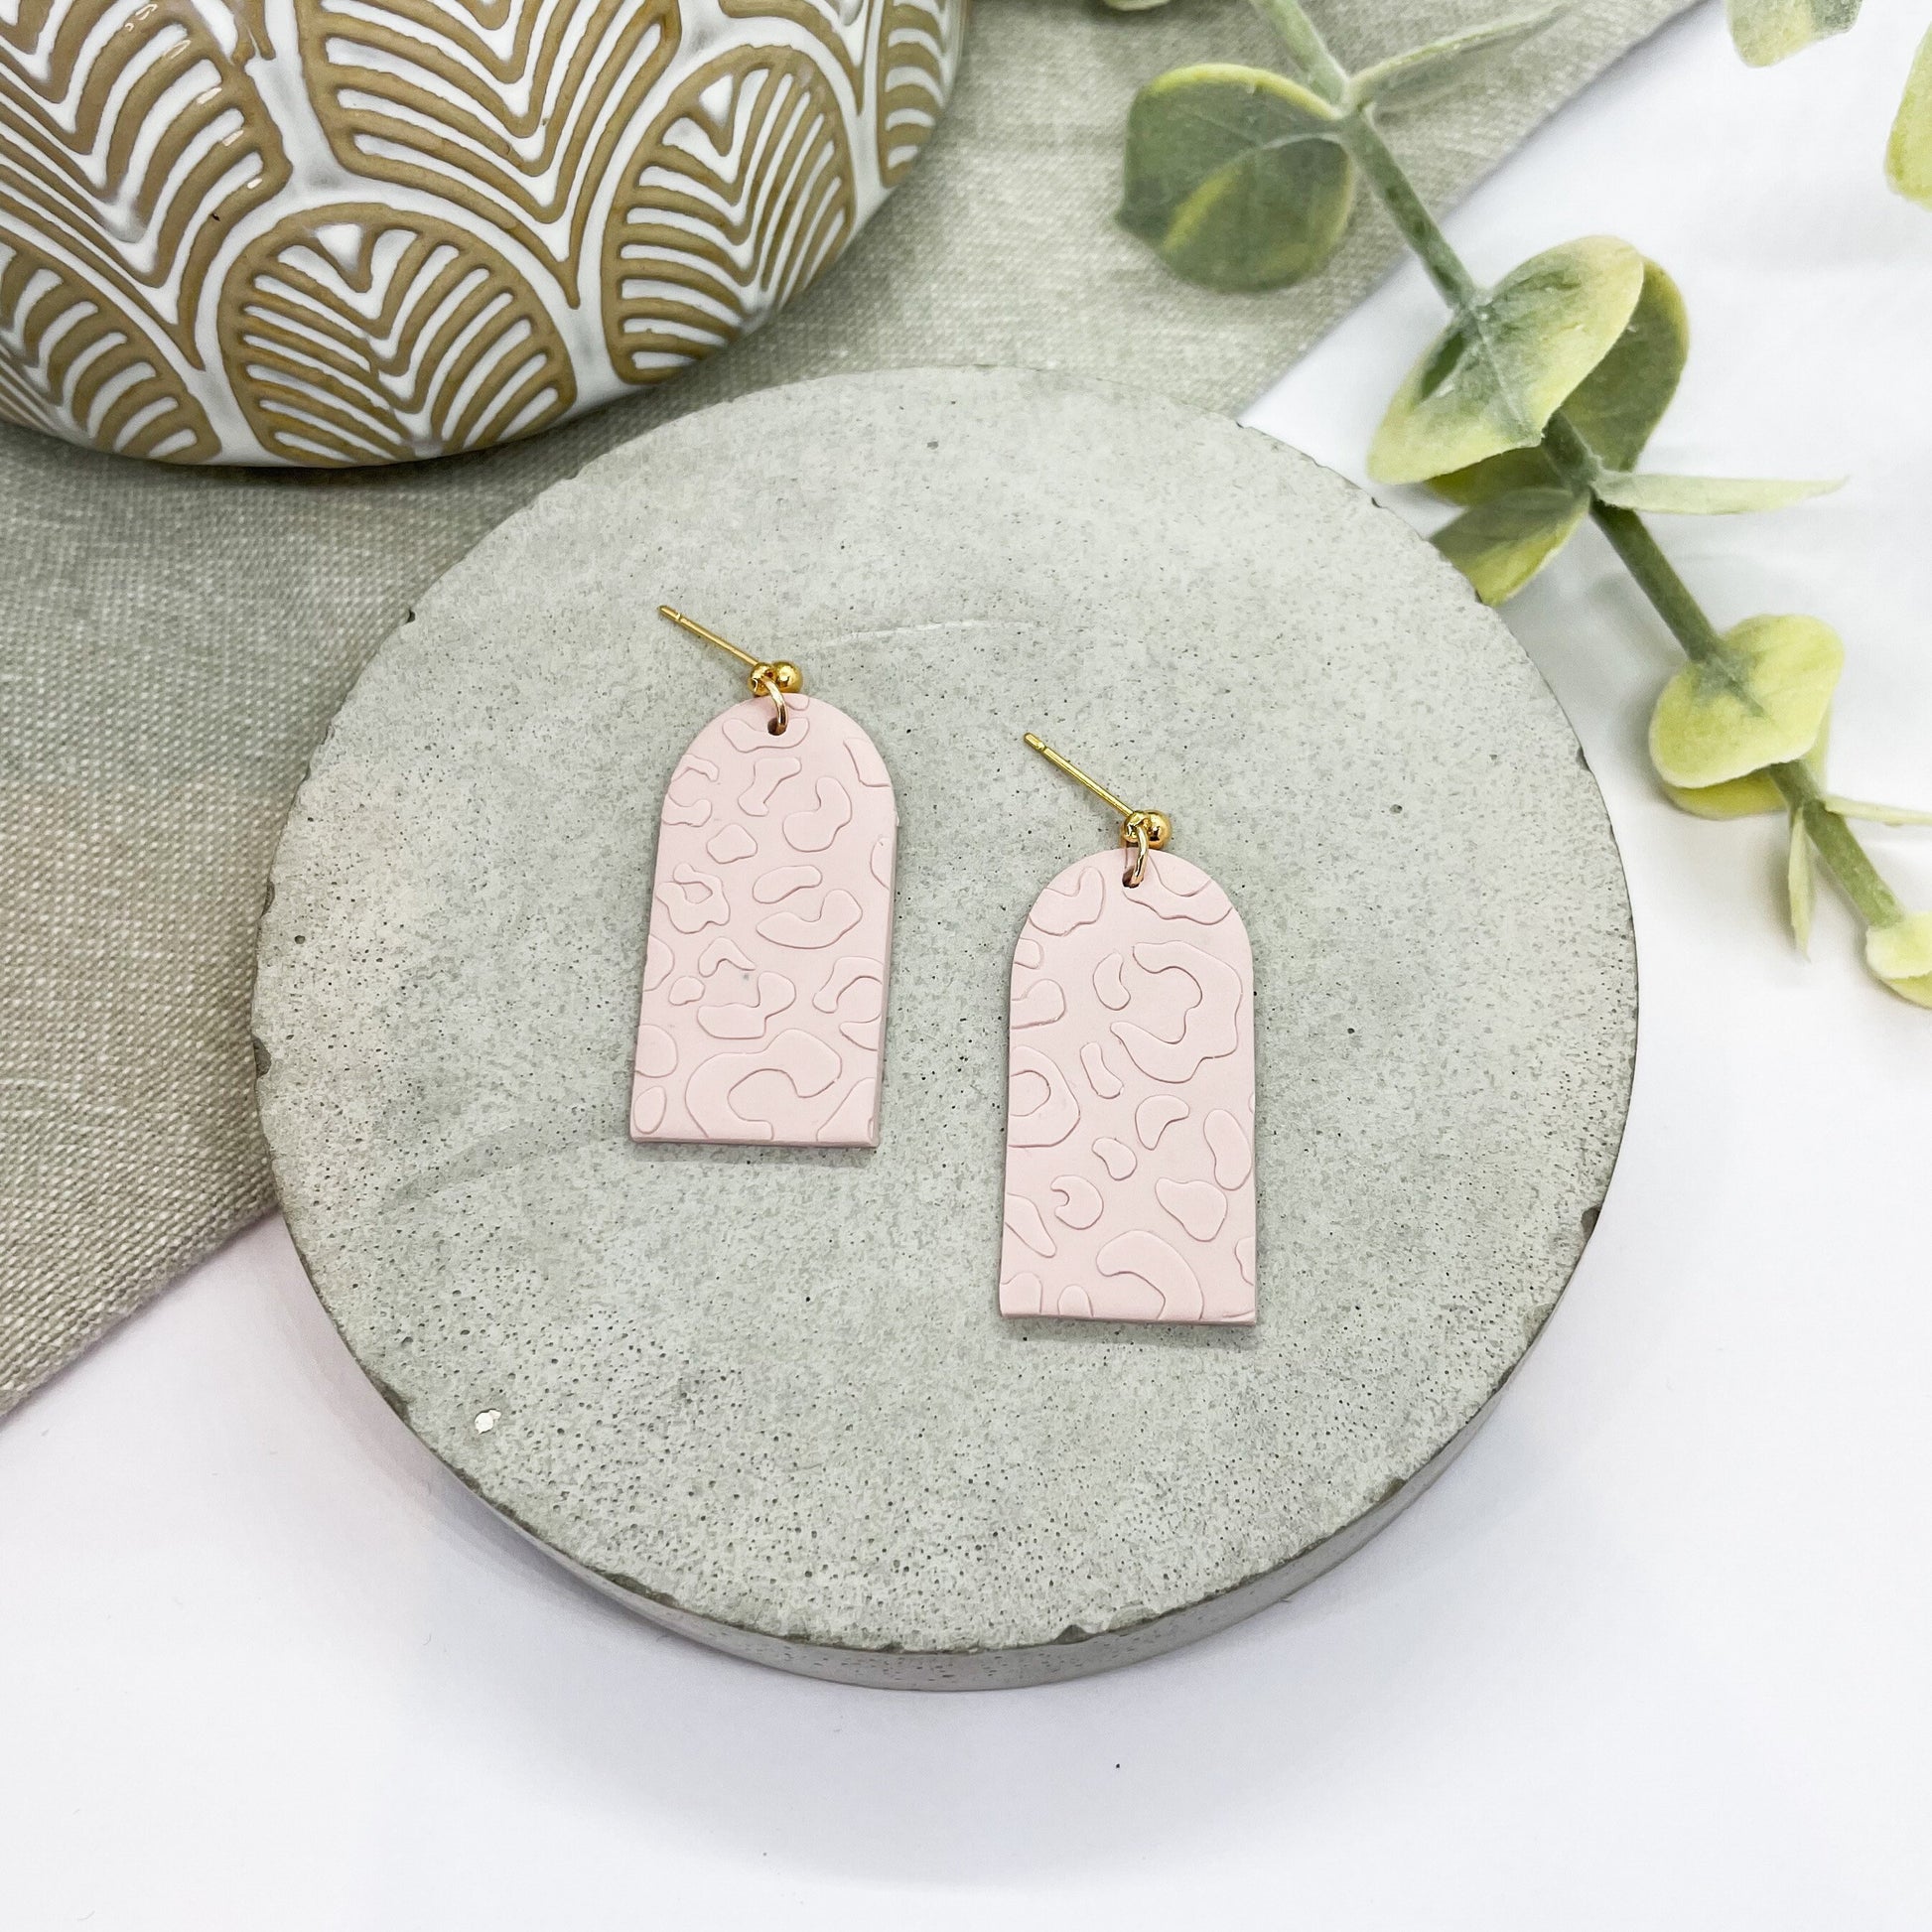 polymer clay earrings, pink embossed leopard print, Mother’s Day gift, post box gift, best friend birthday gift, girlfriend gift,